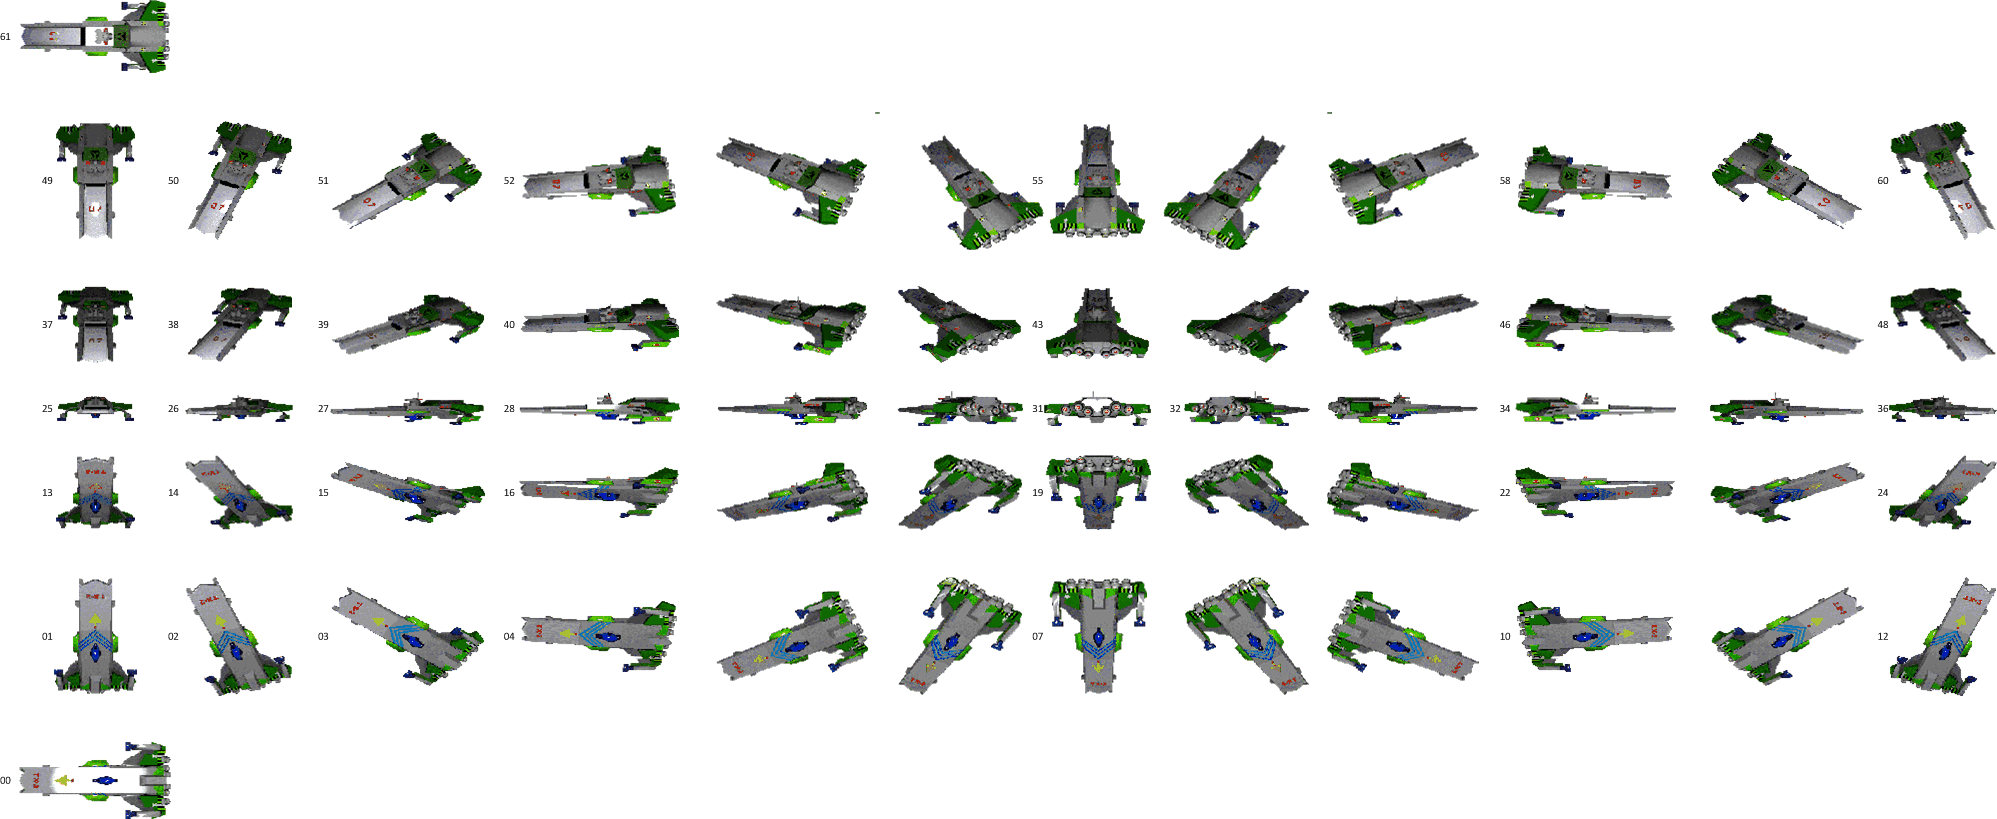 refresh_wc1_sprites1.png